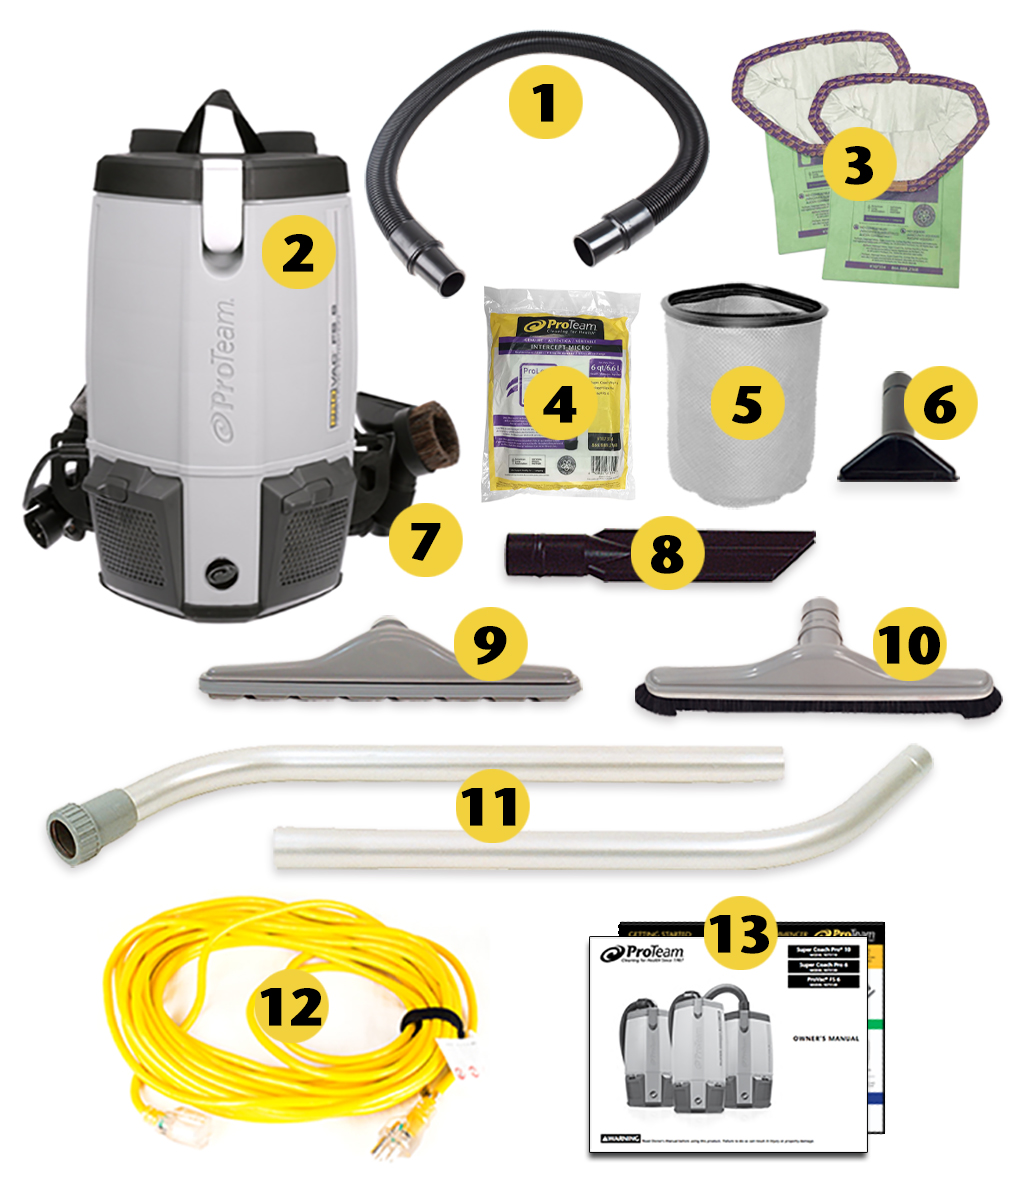 Image of what is included in the box of ProTeam Provac FS, 6 quart backpack vacuum